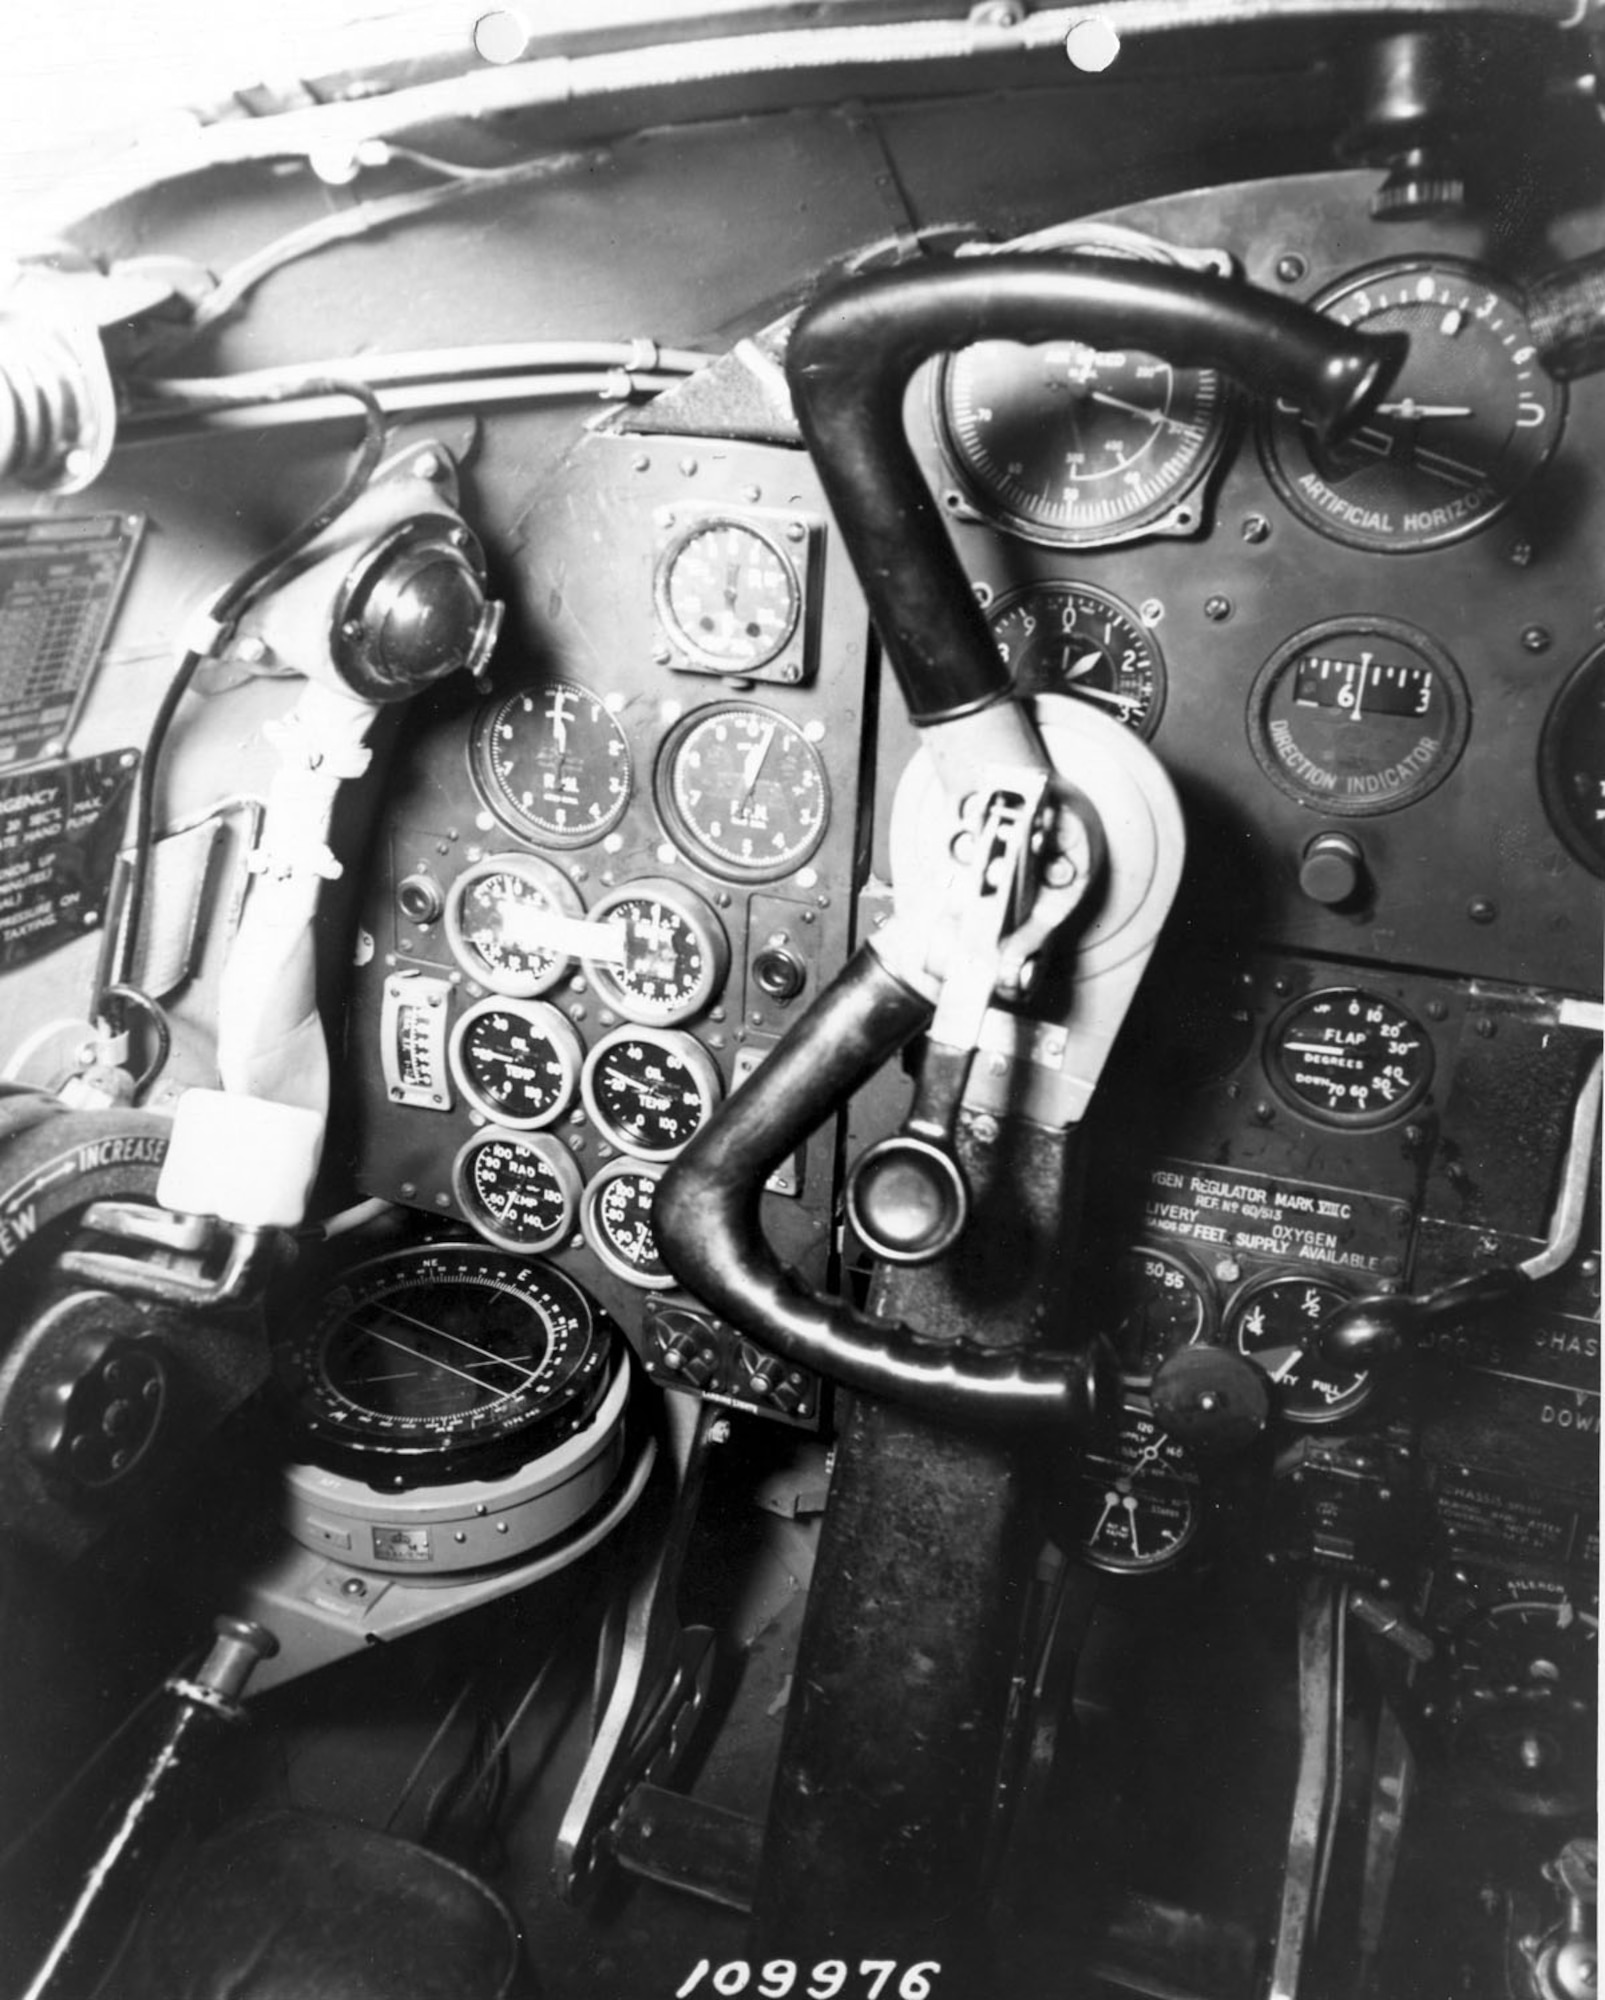 DAYTON, Ohio - De Havilland DH 98 cockpit at the National Museum of the U.S. Air Force. (U.S. Air Force photo)